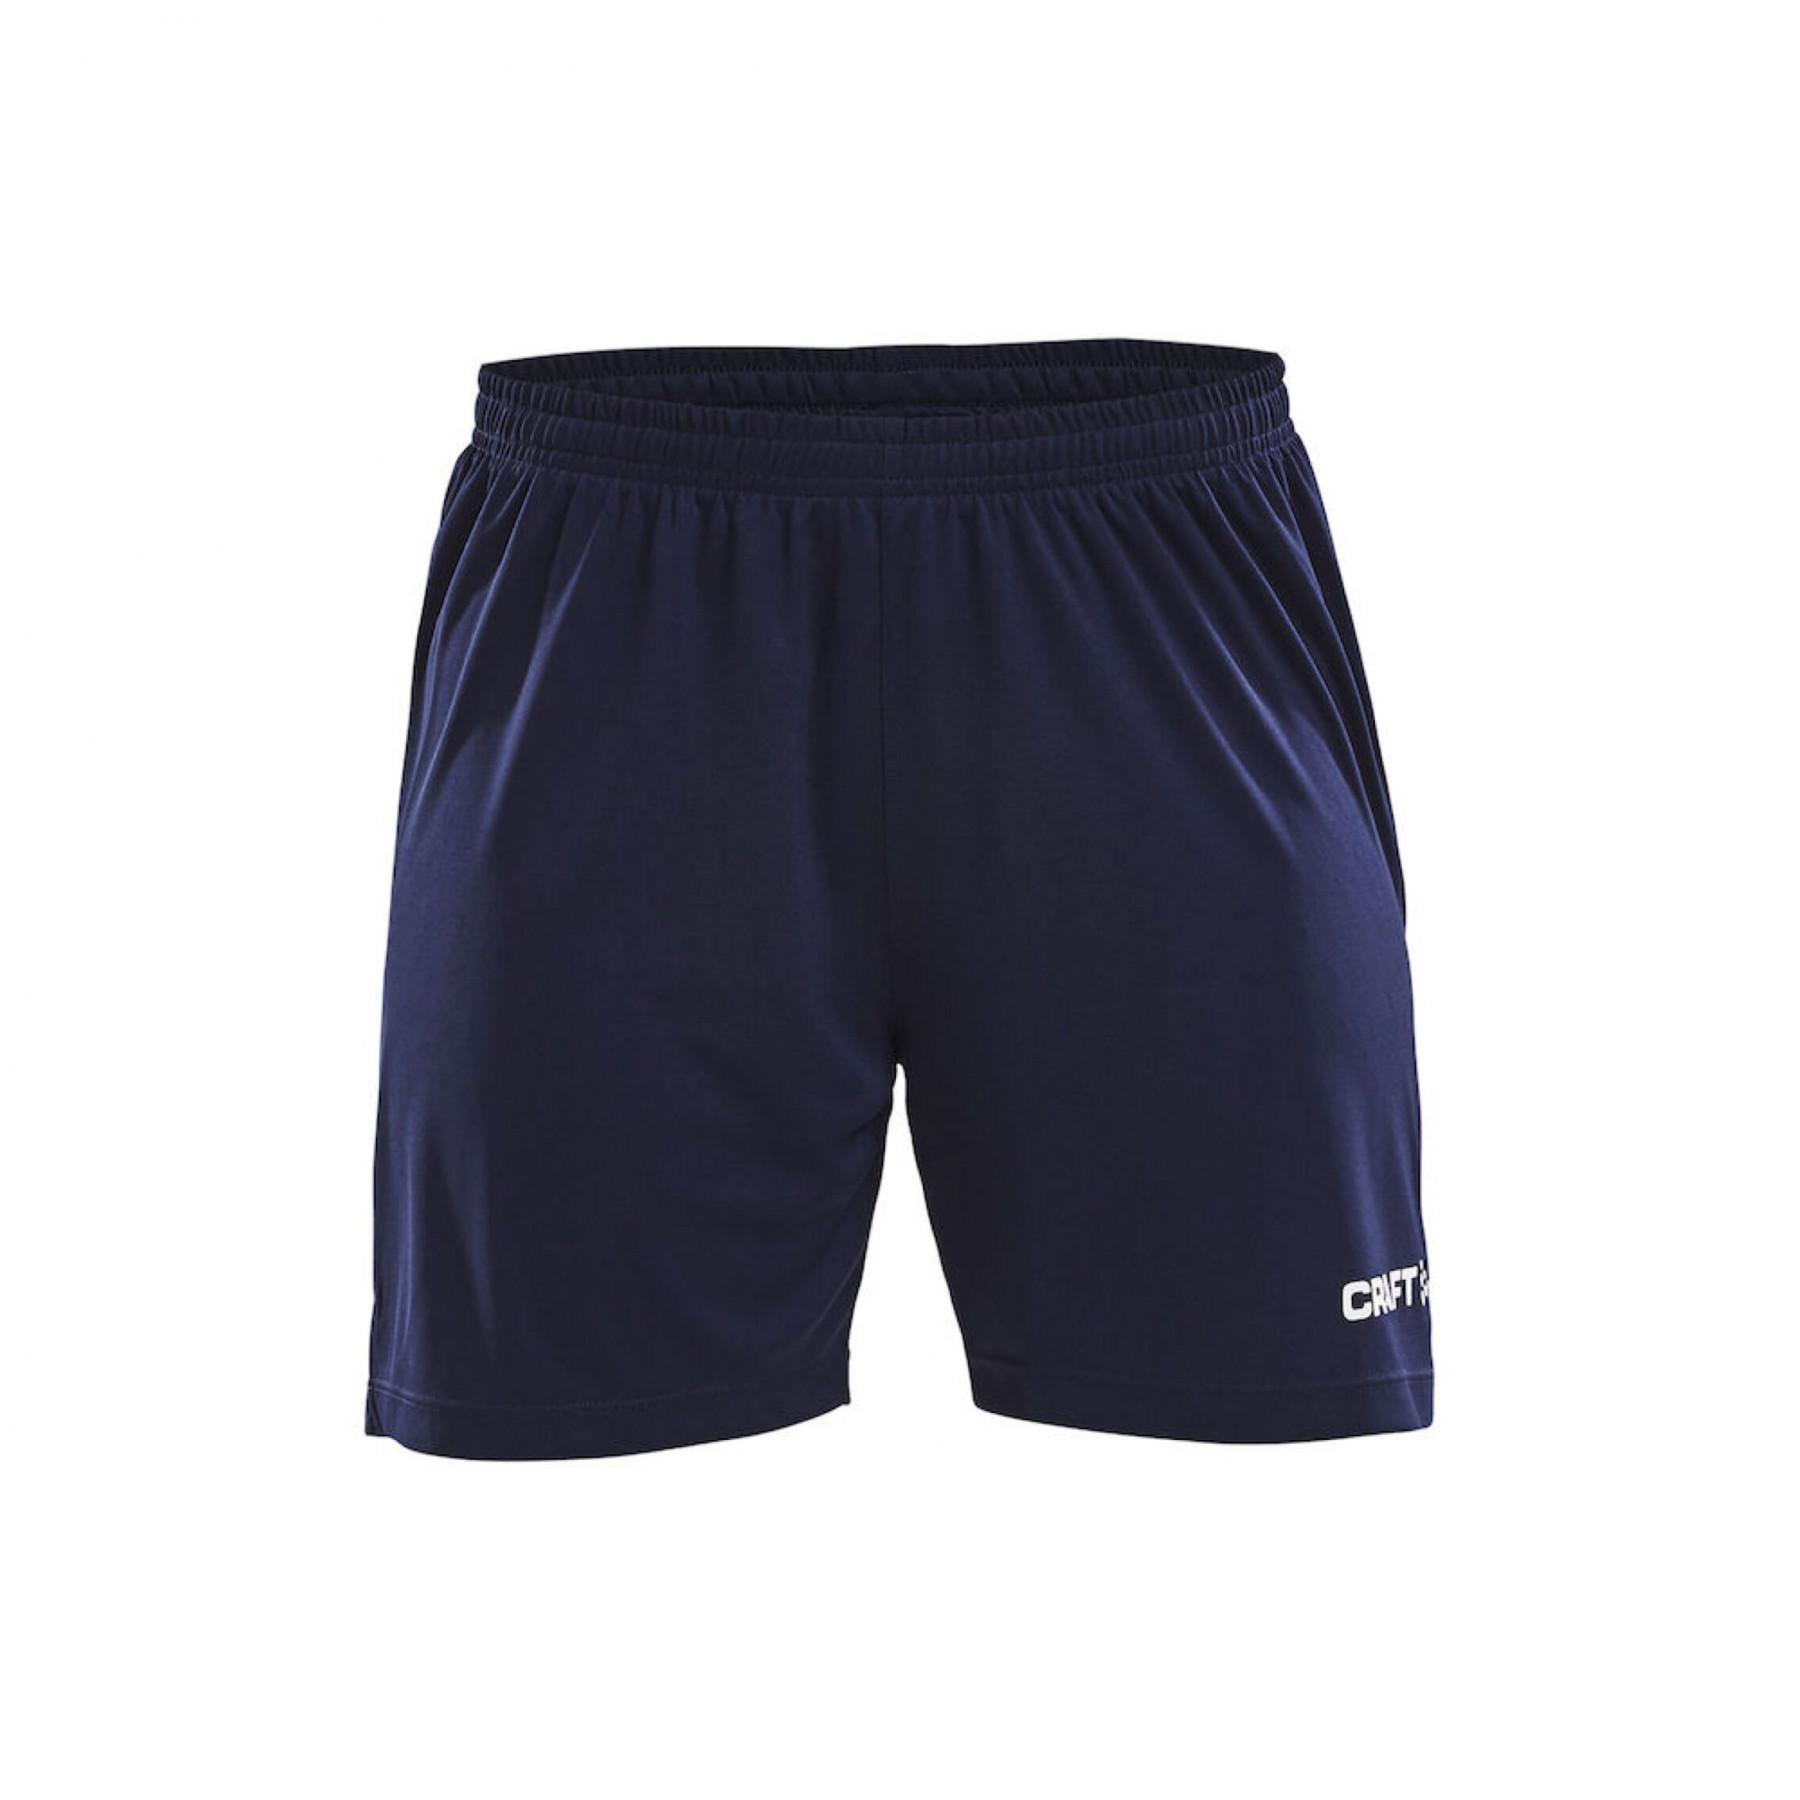 Women's shorts Craft squad solid